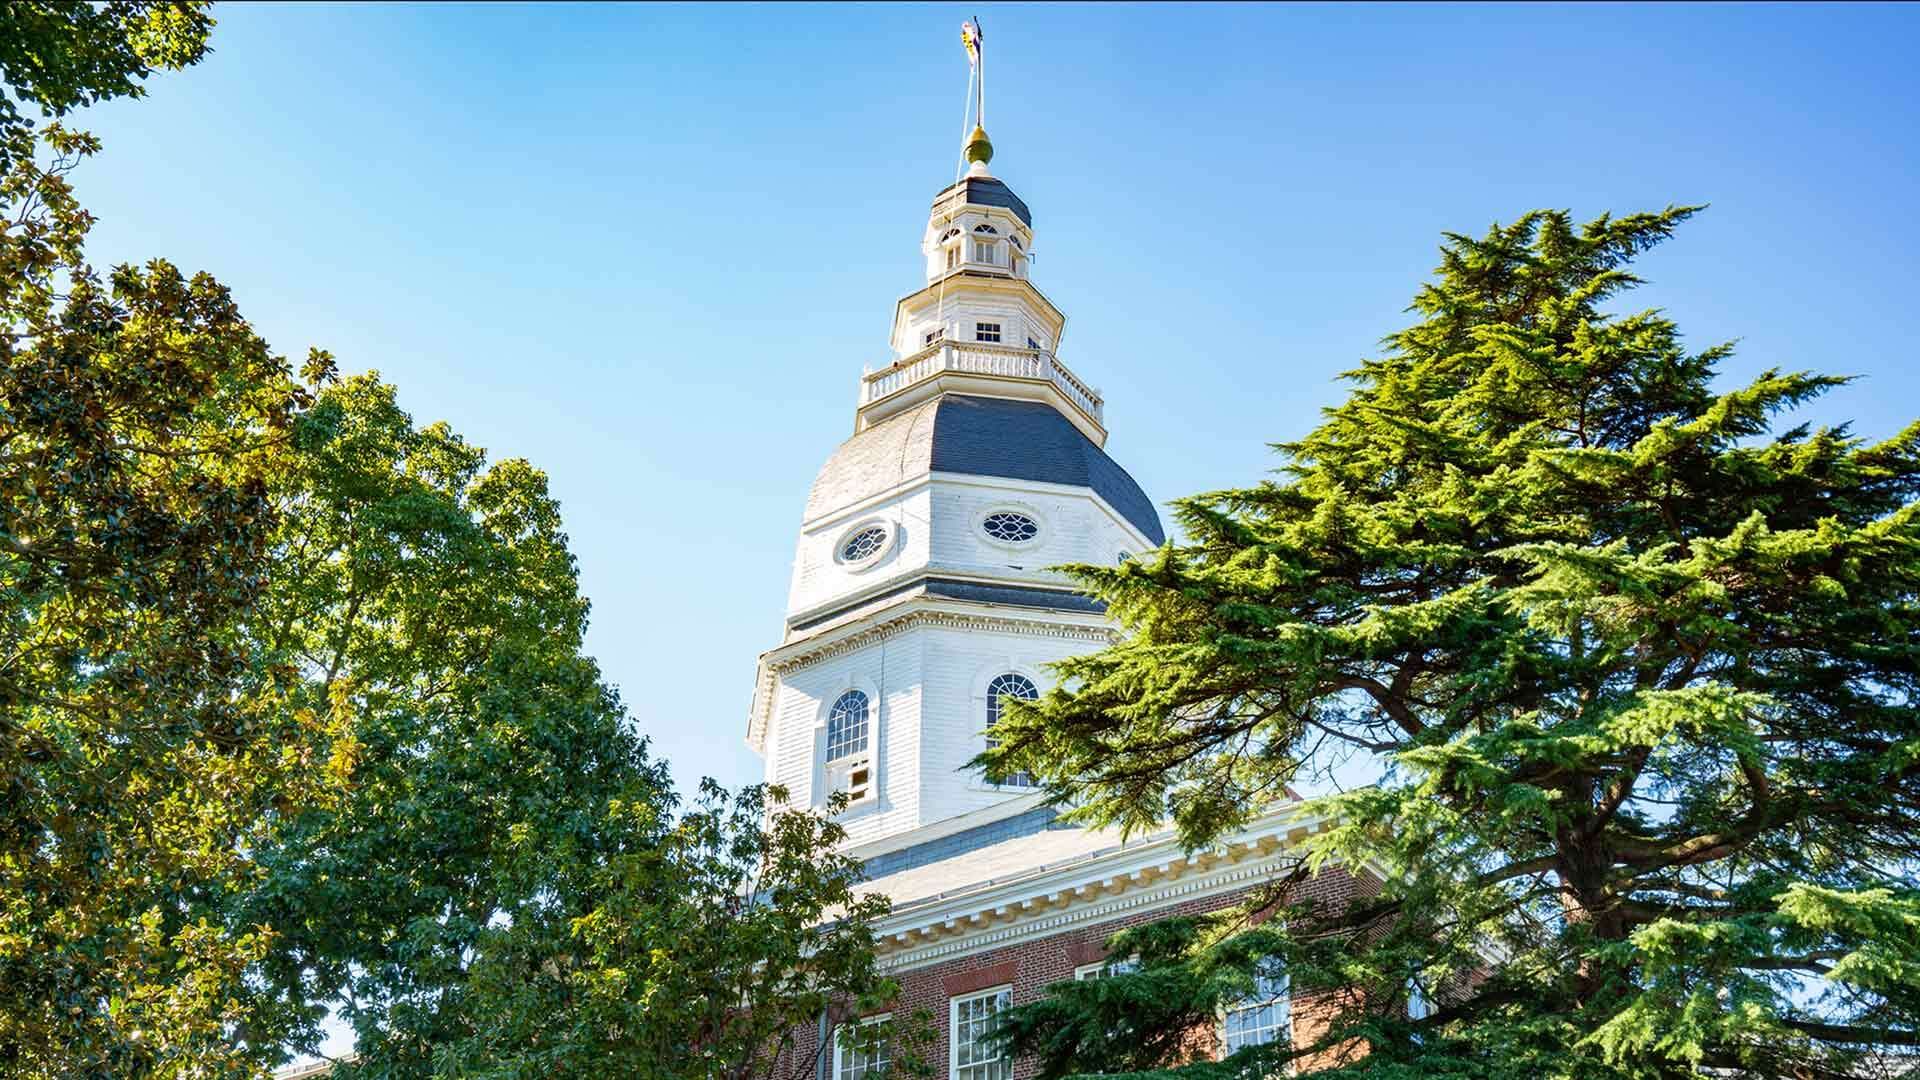 State House in Annapolis